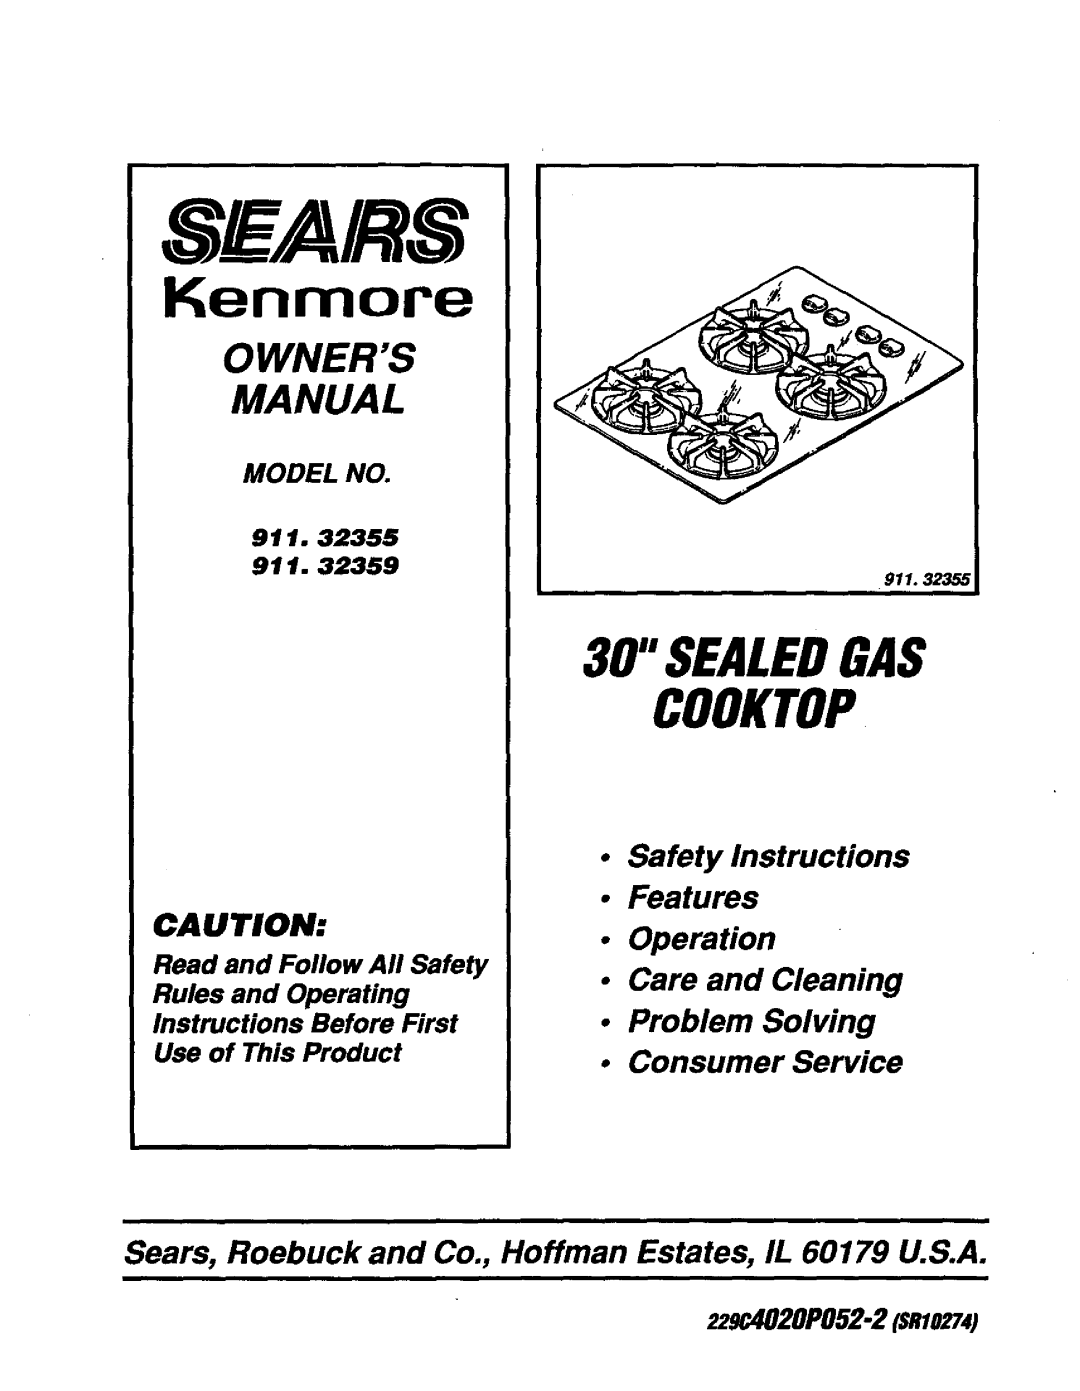 Sears 911.3235S owner manual Safety Instructions Features Operation, Care and Cleaning Problem Solving, Consumer Service 